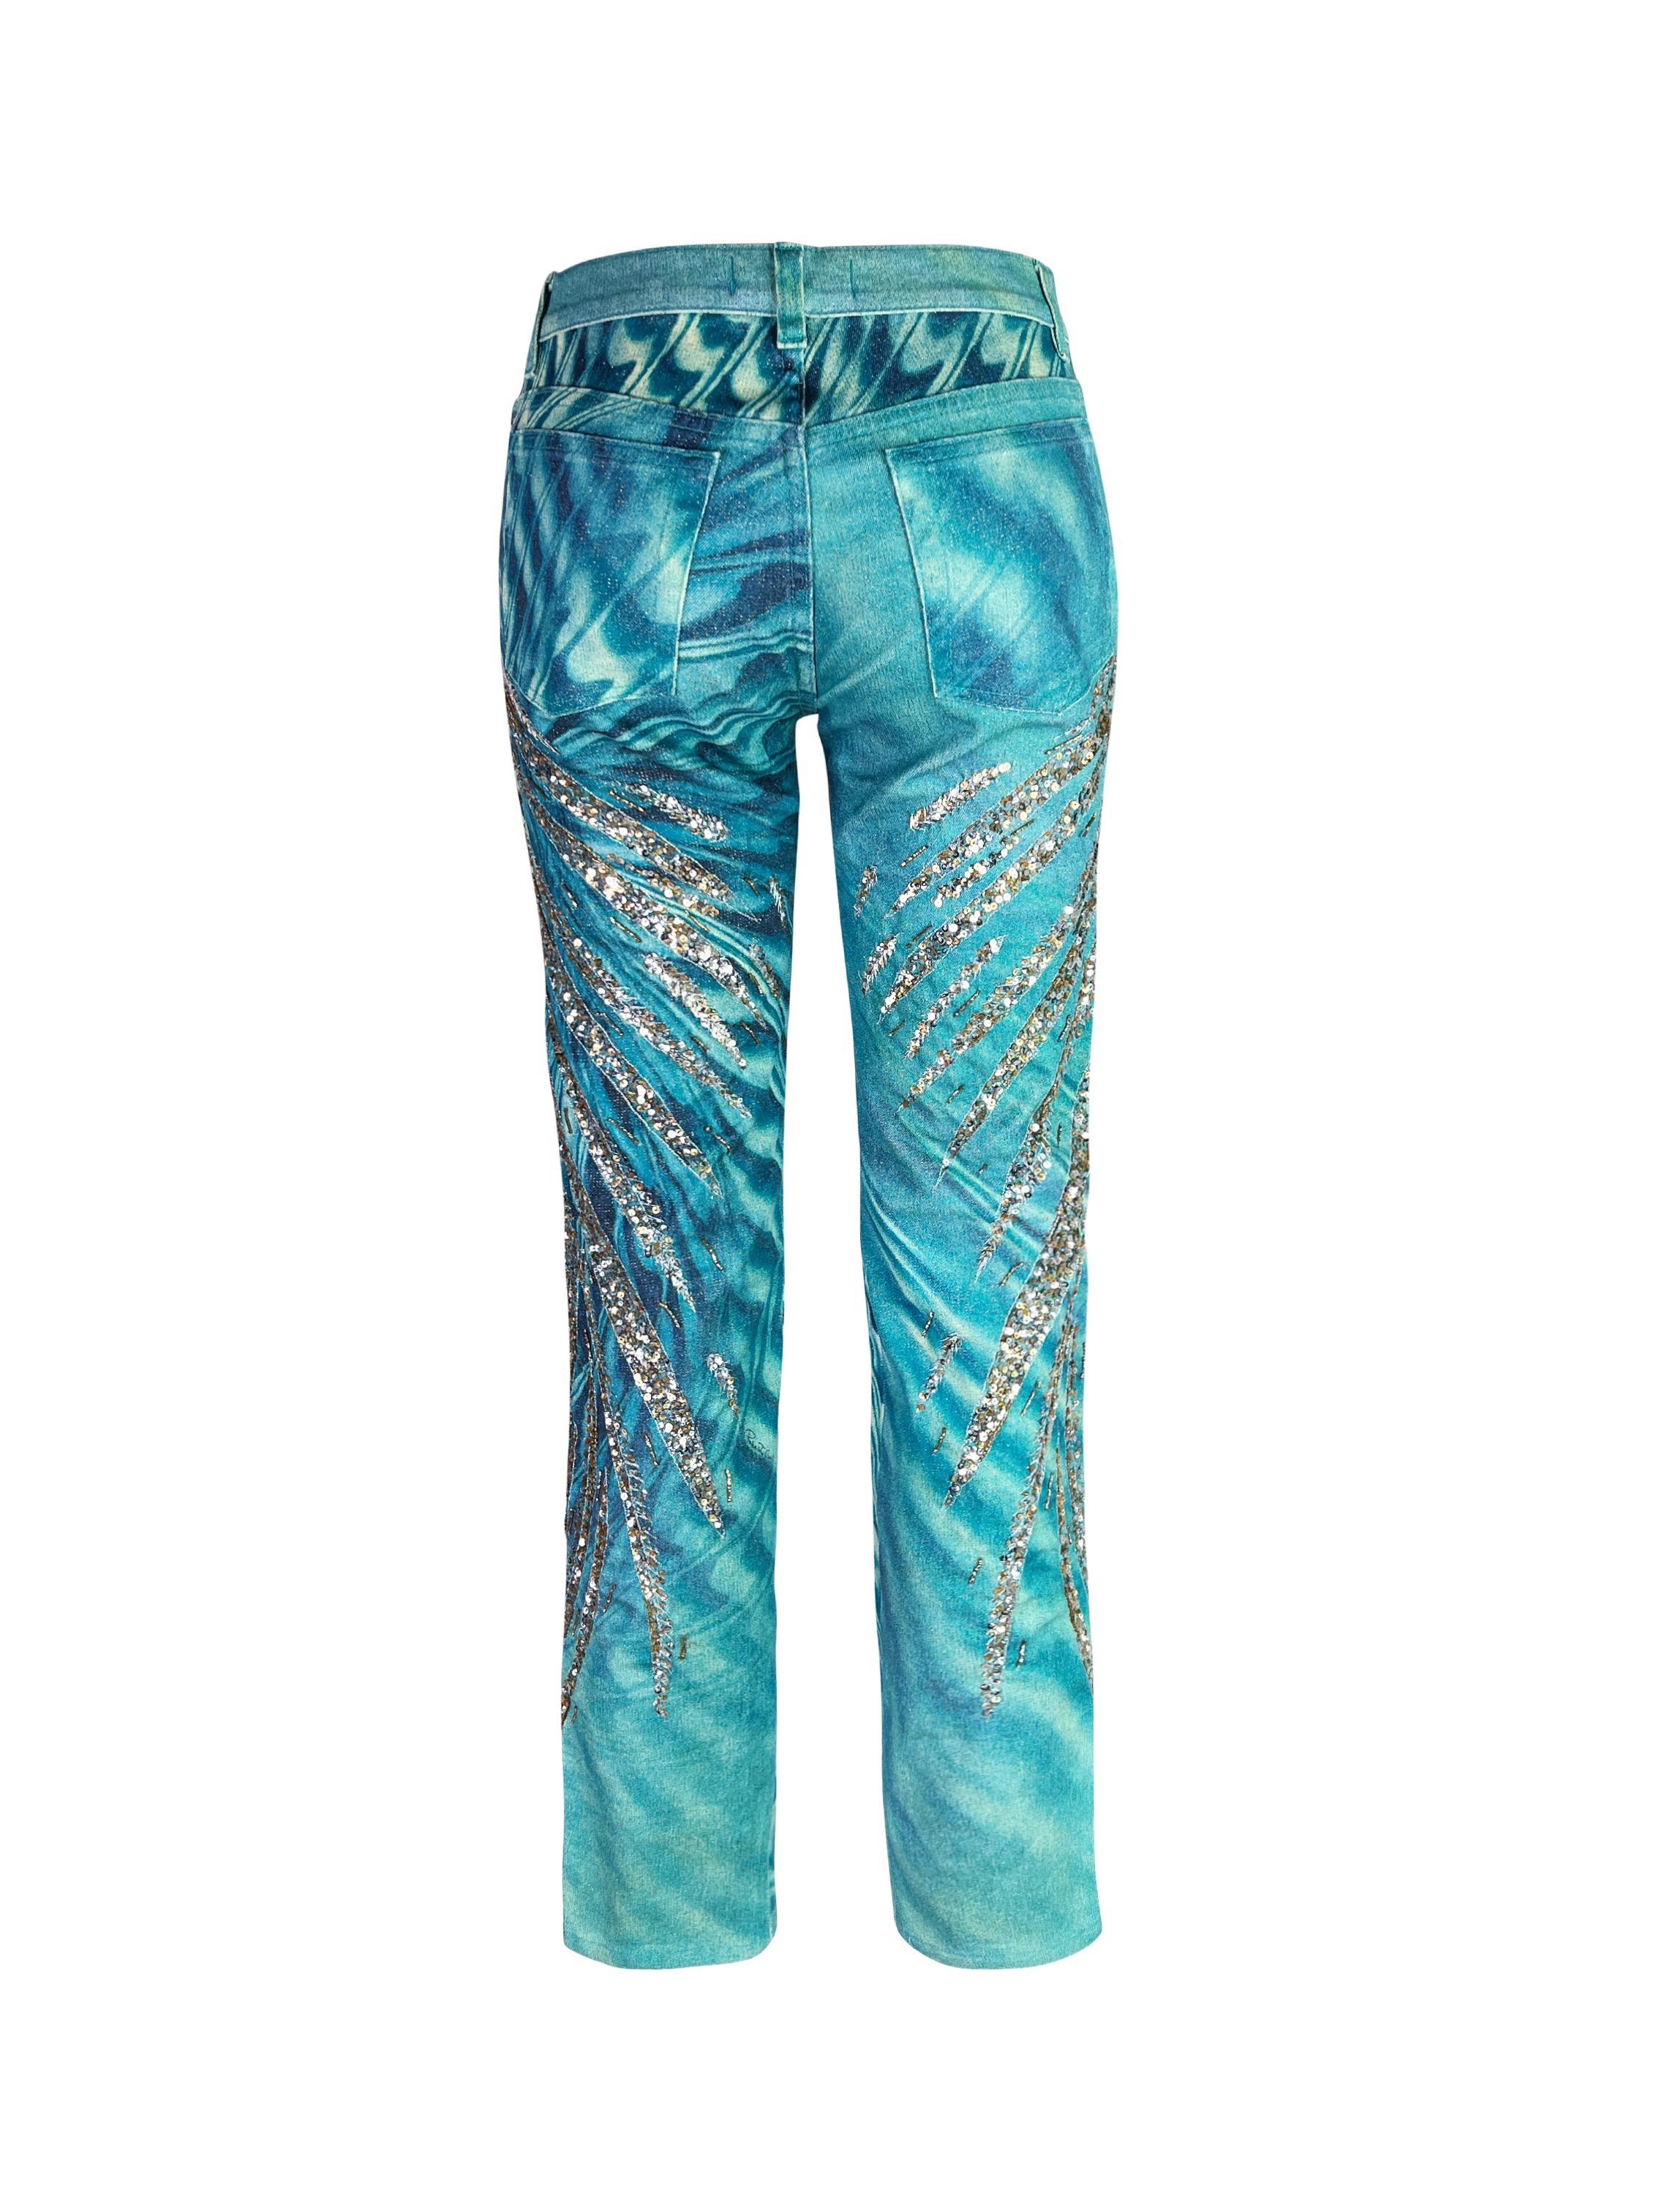 tunning Roberto Cavalli jeans as seen on the runway of Spring 2001 collection. Beautiful sequins embroidery on the iconic optical illusion print with golden metallic shine.

Size S. Slightly stretchy (2% elastane). Measurements (flat lay on one